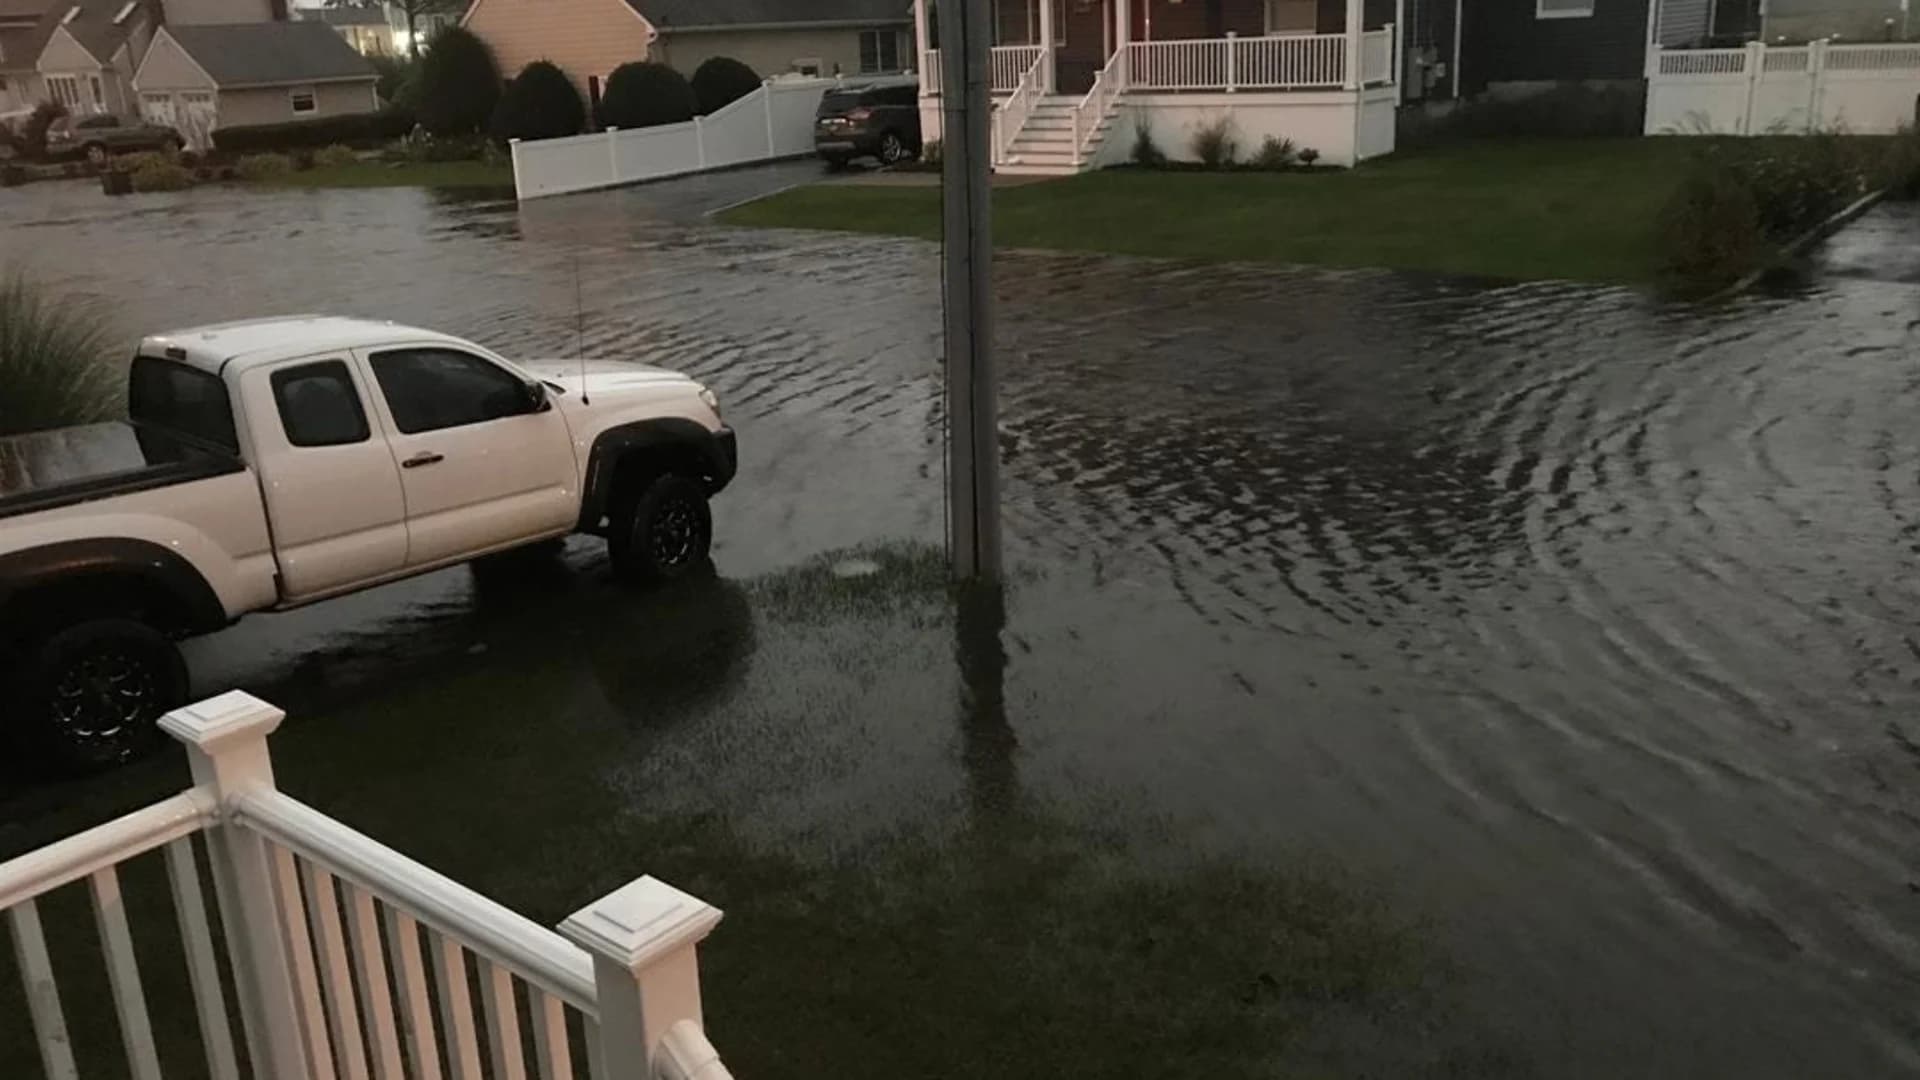 Your Photos: Storm brings flooding and damage to LI